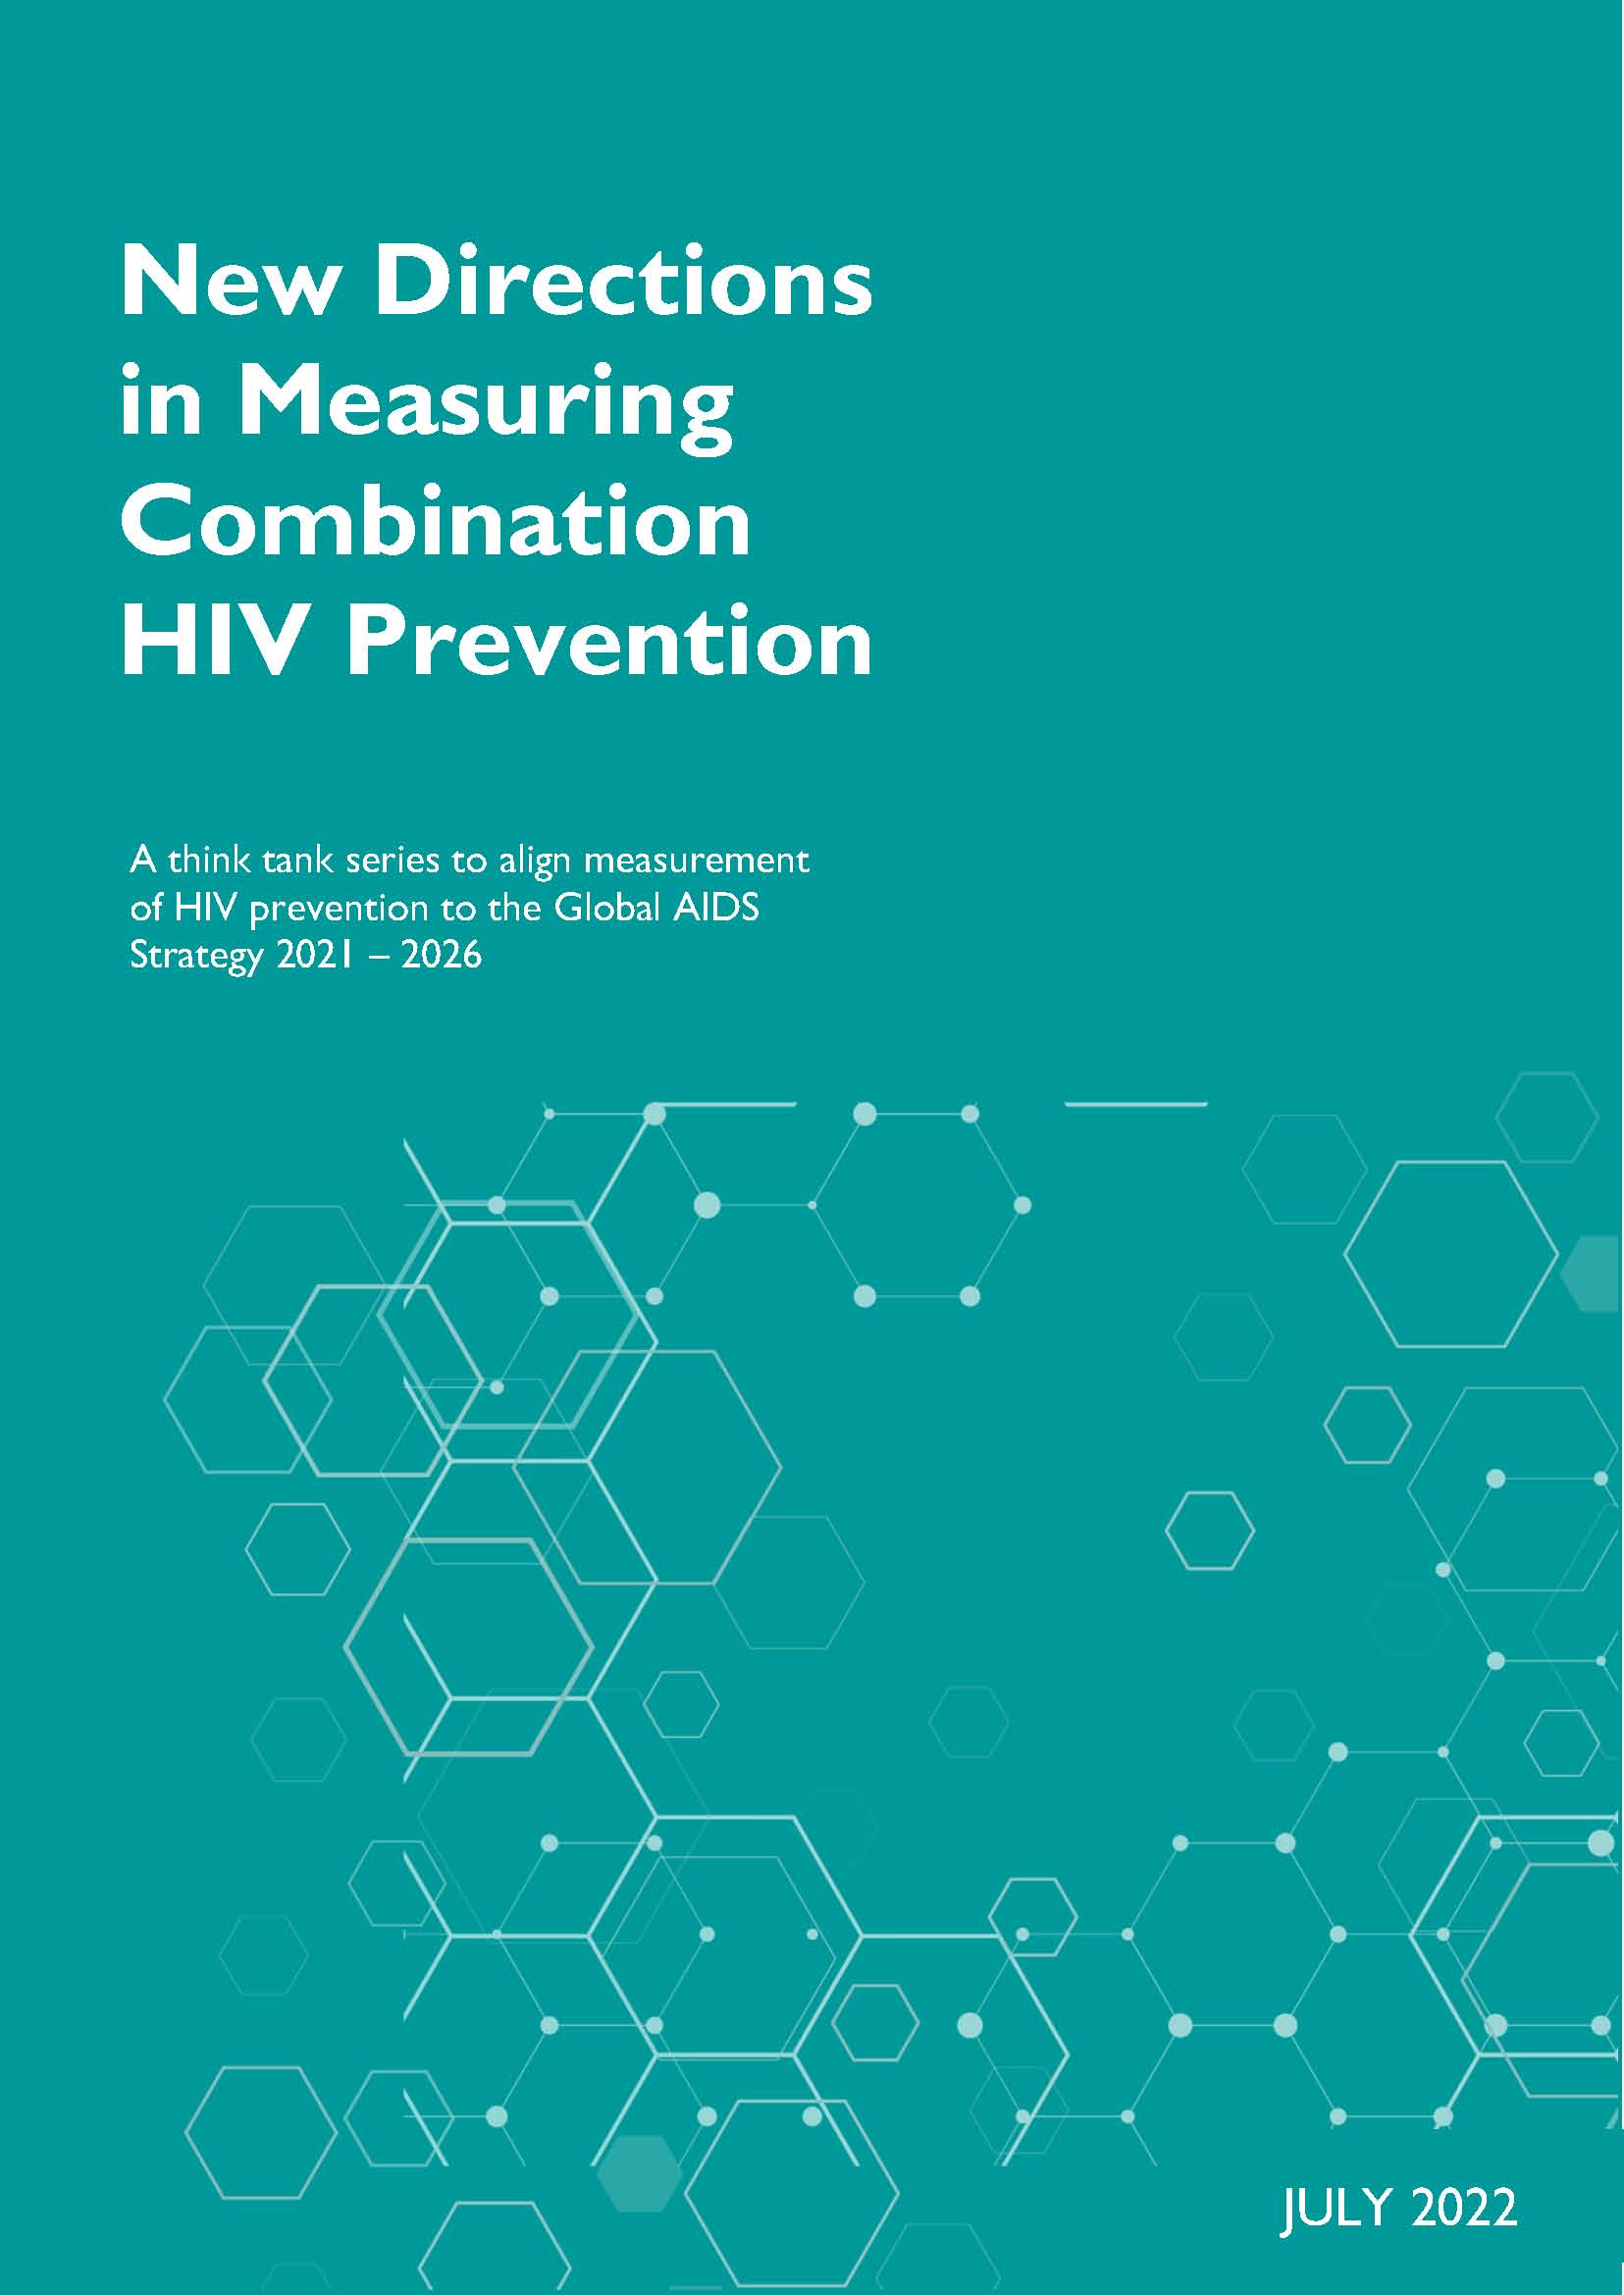 New Directions in HIV Preventirement Series Report Final 1